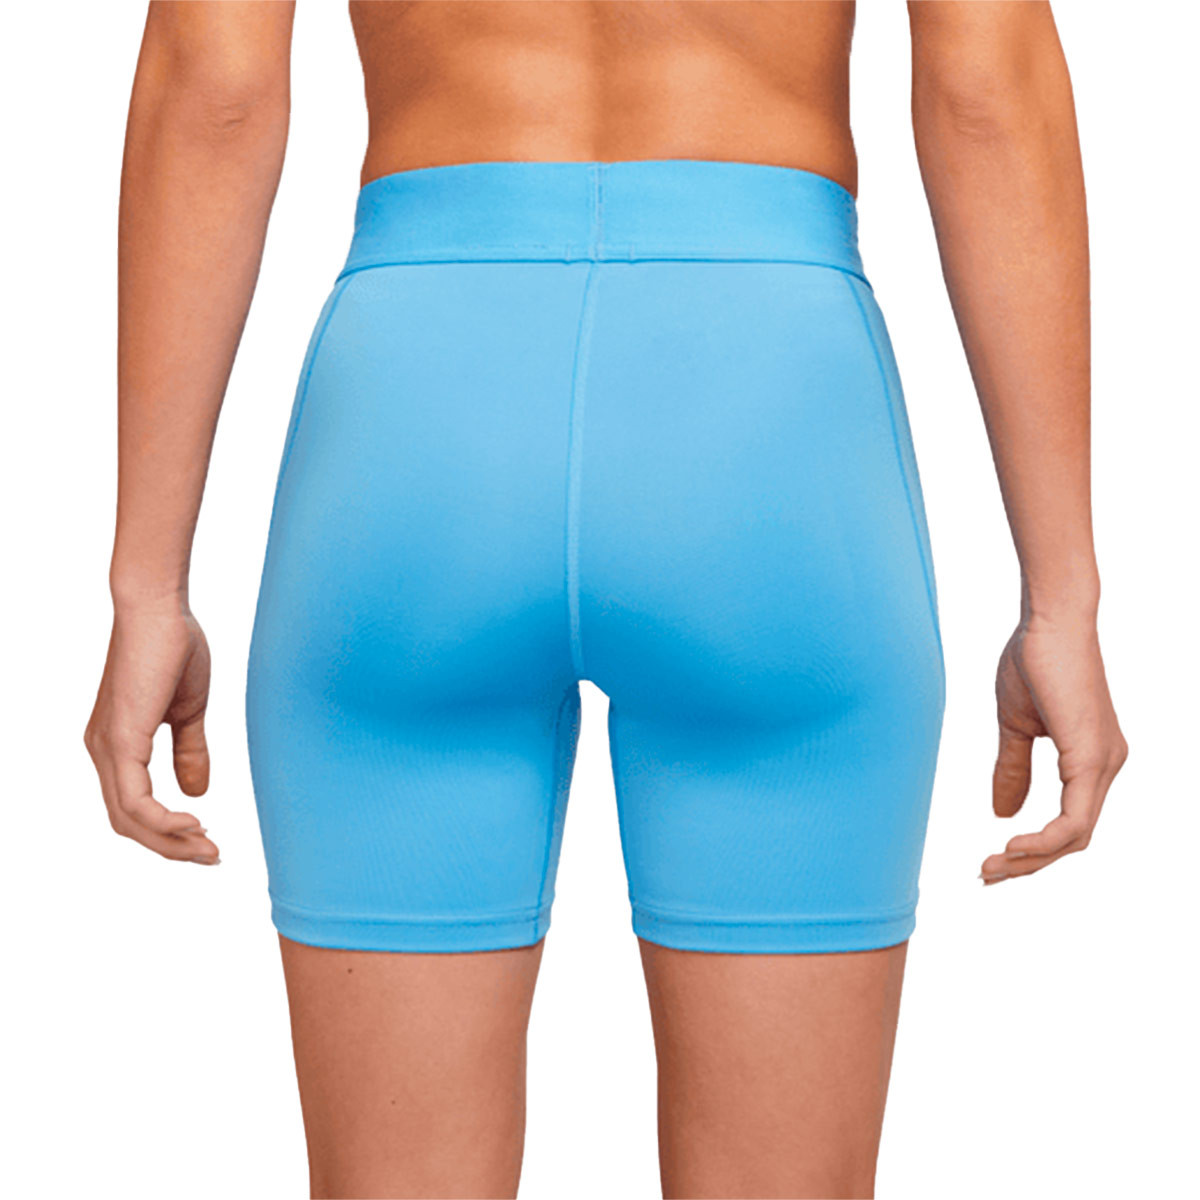 NIKE Pro Womens Compression Shorts - TEAL BLUE